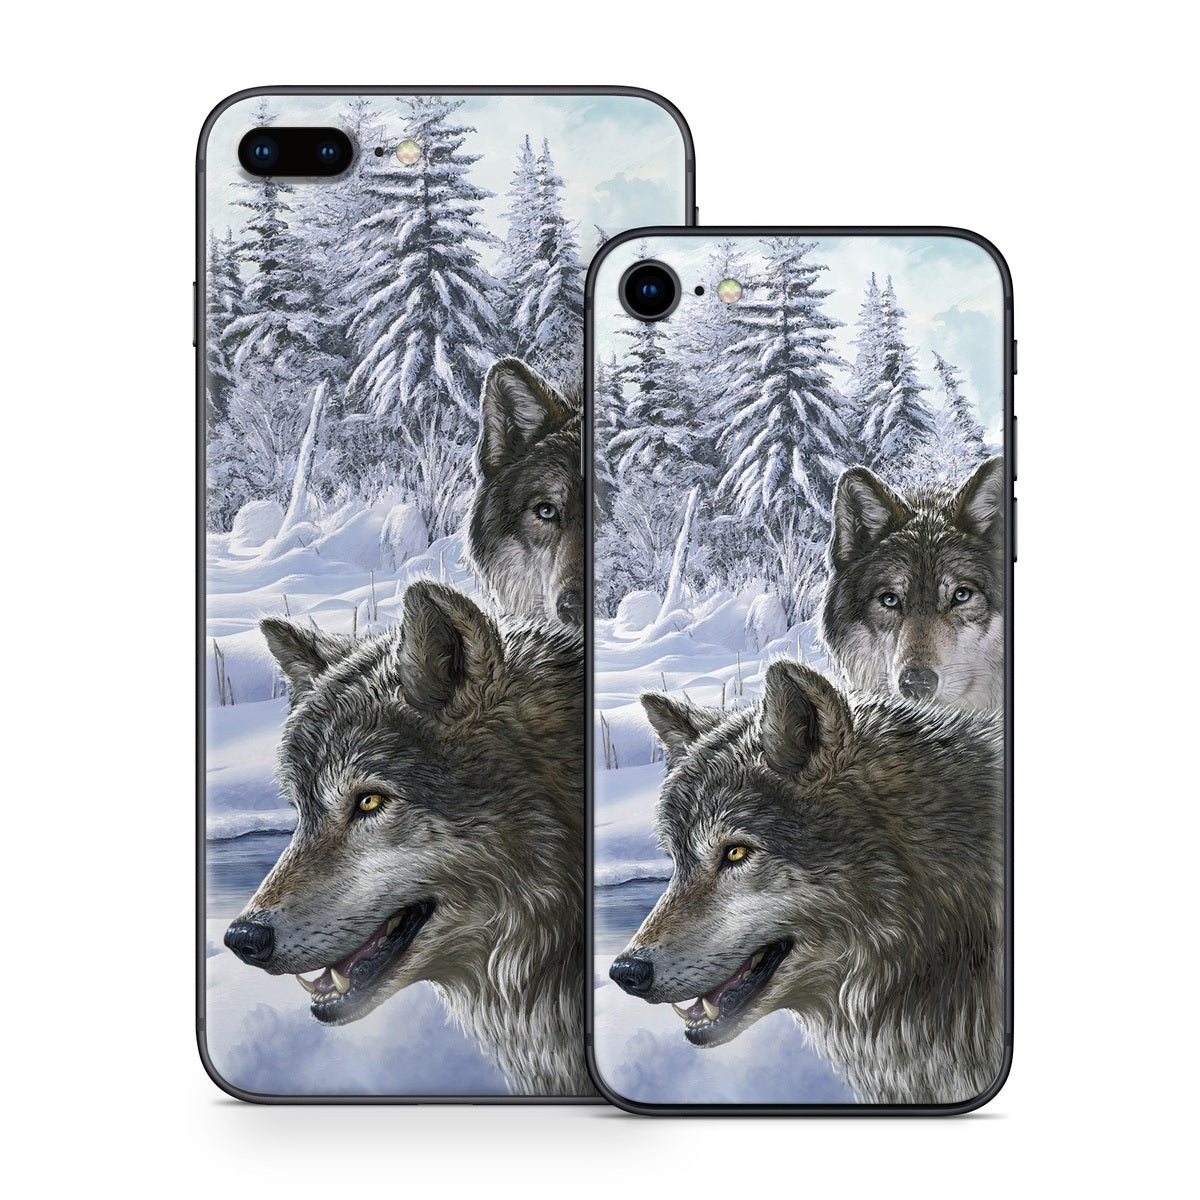 Snow Wolves - Apple iPhone 8 Skin